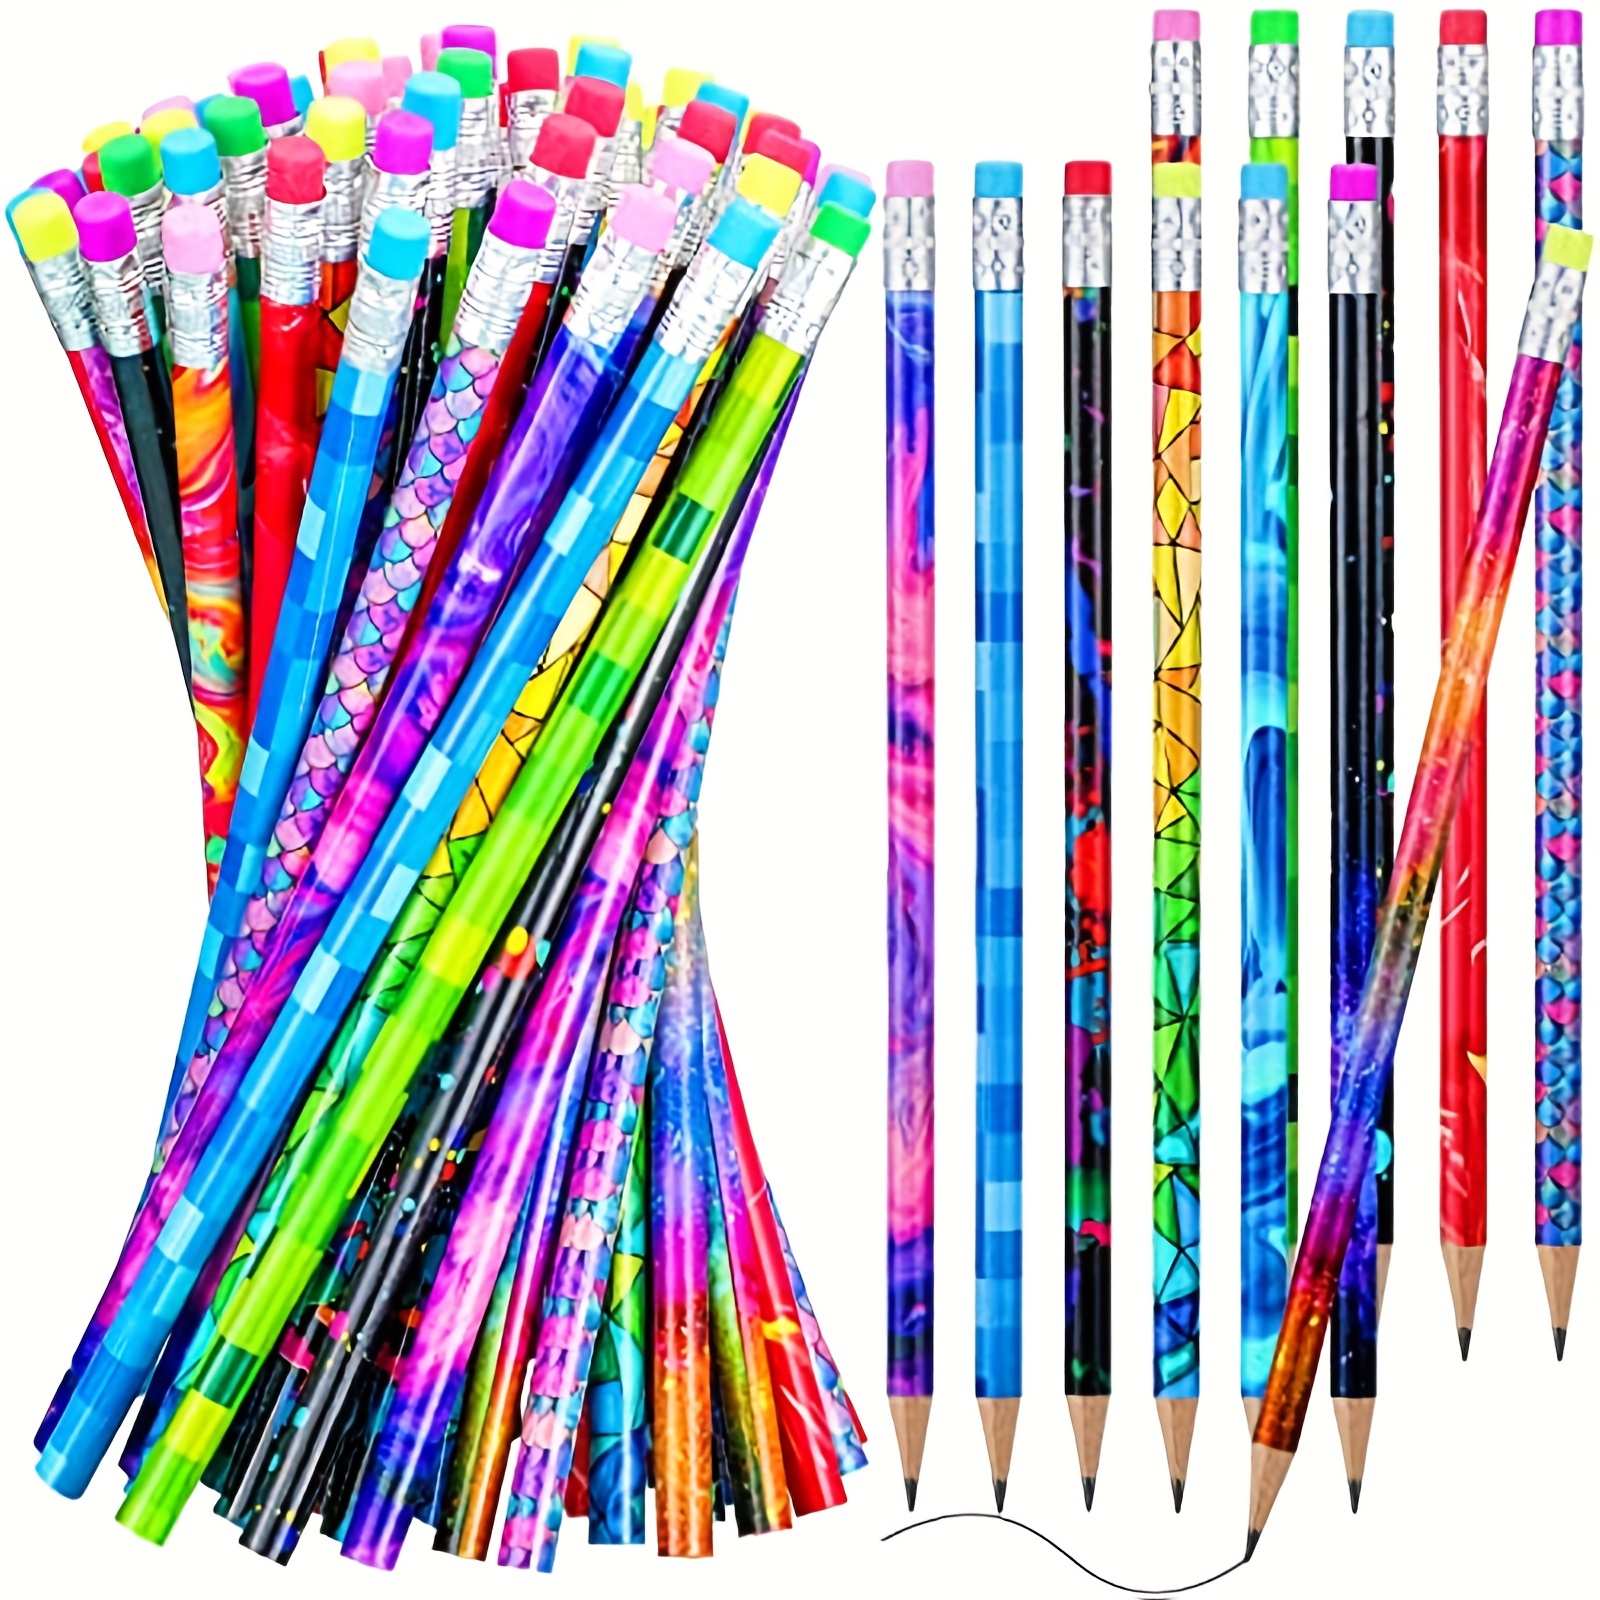 4 Color in 1 Colorful Rainbow Pencils for Kids Multi Colored